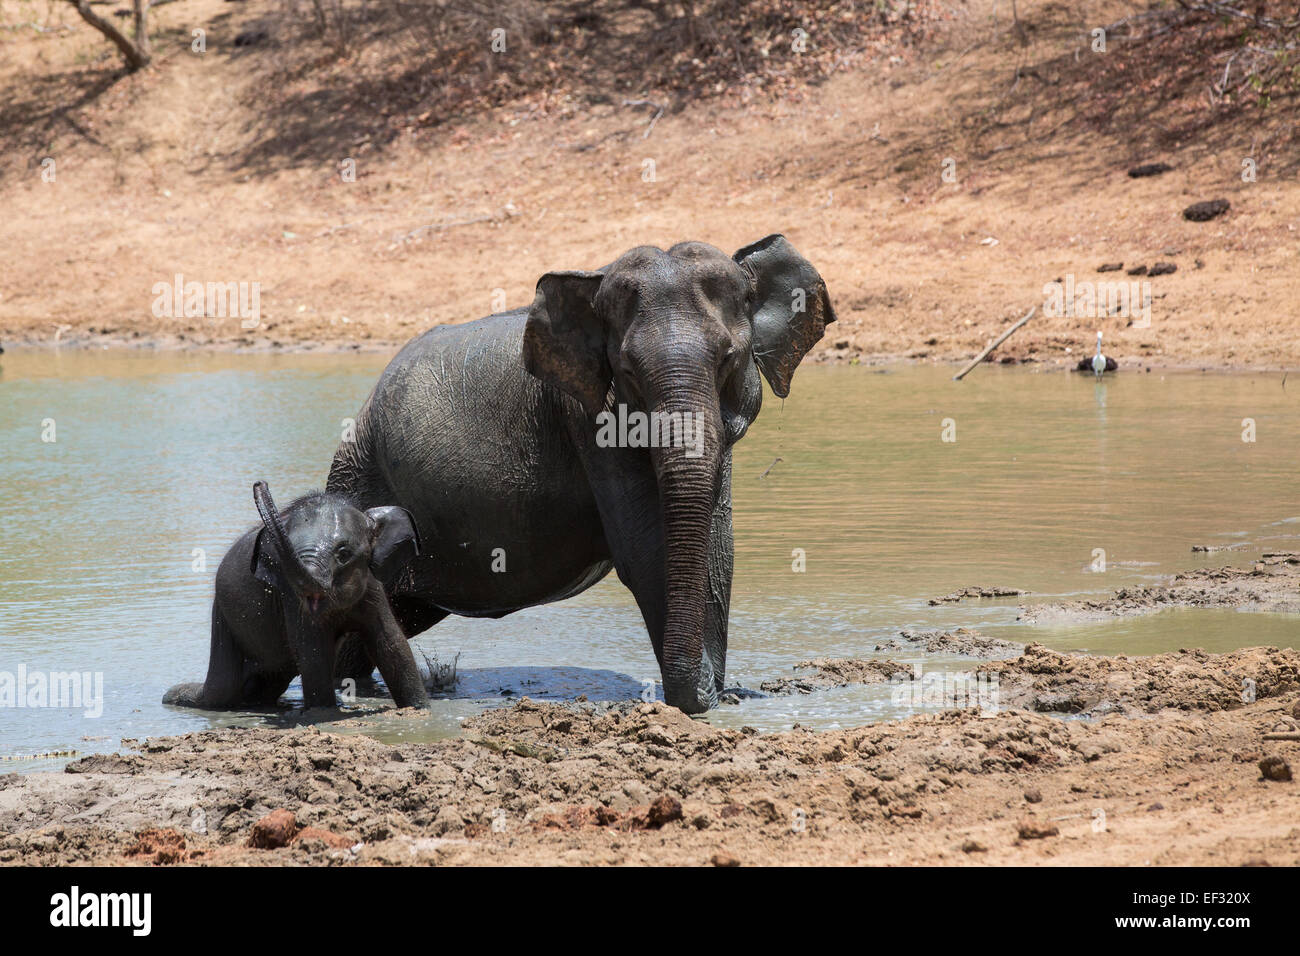 A elephant mother and calf emerge from a water hole during the peak of the dry season at Yala NP, Sri Lanka. Stock Photo